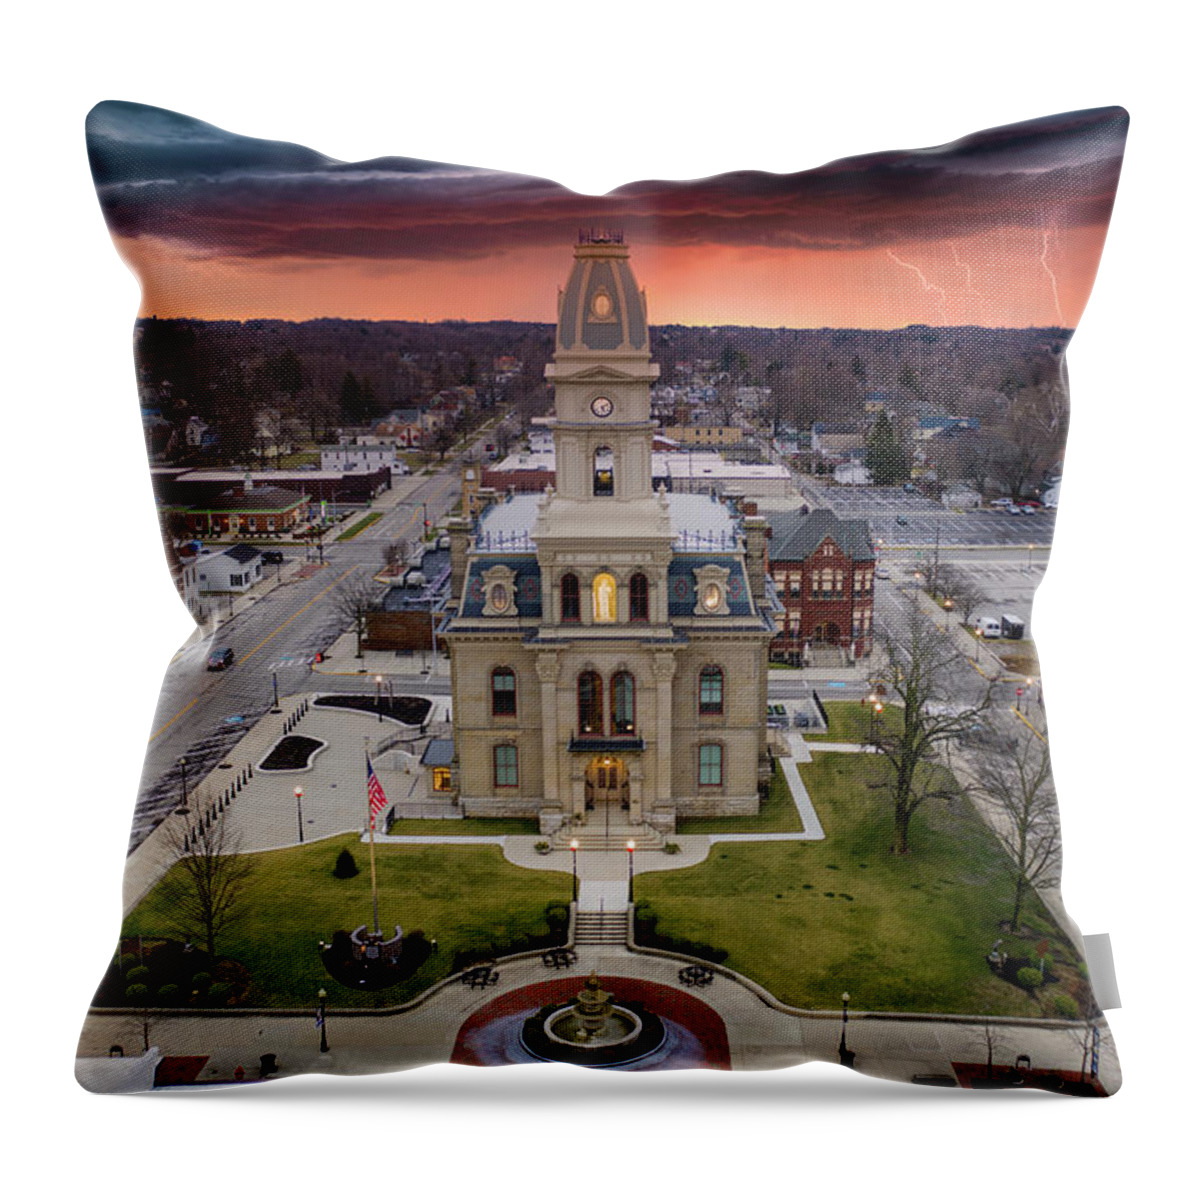  Throw Pillow featuring the photograph Logan County Courthouse #1 by Brian Jones